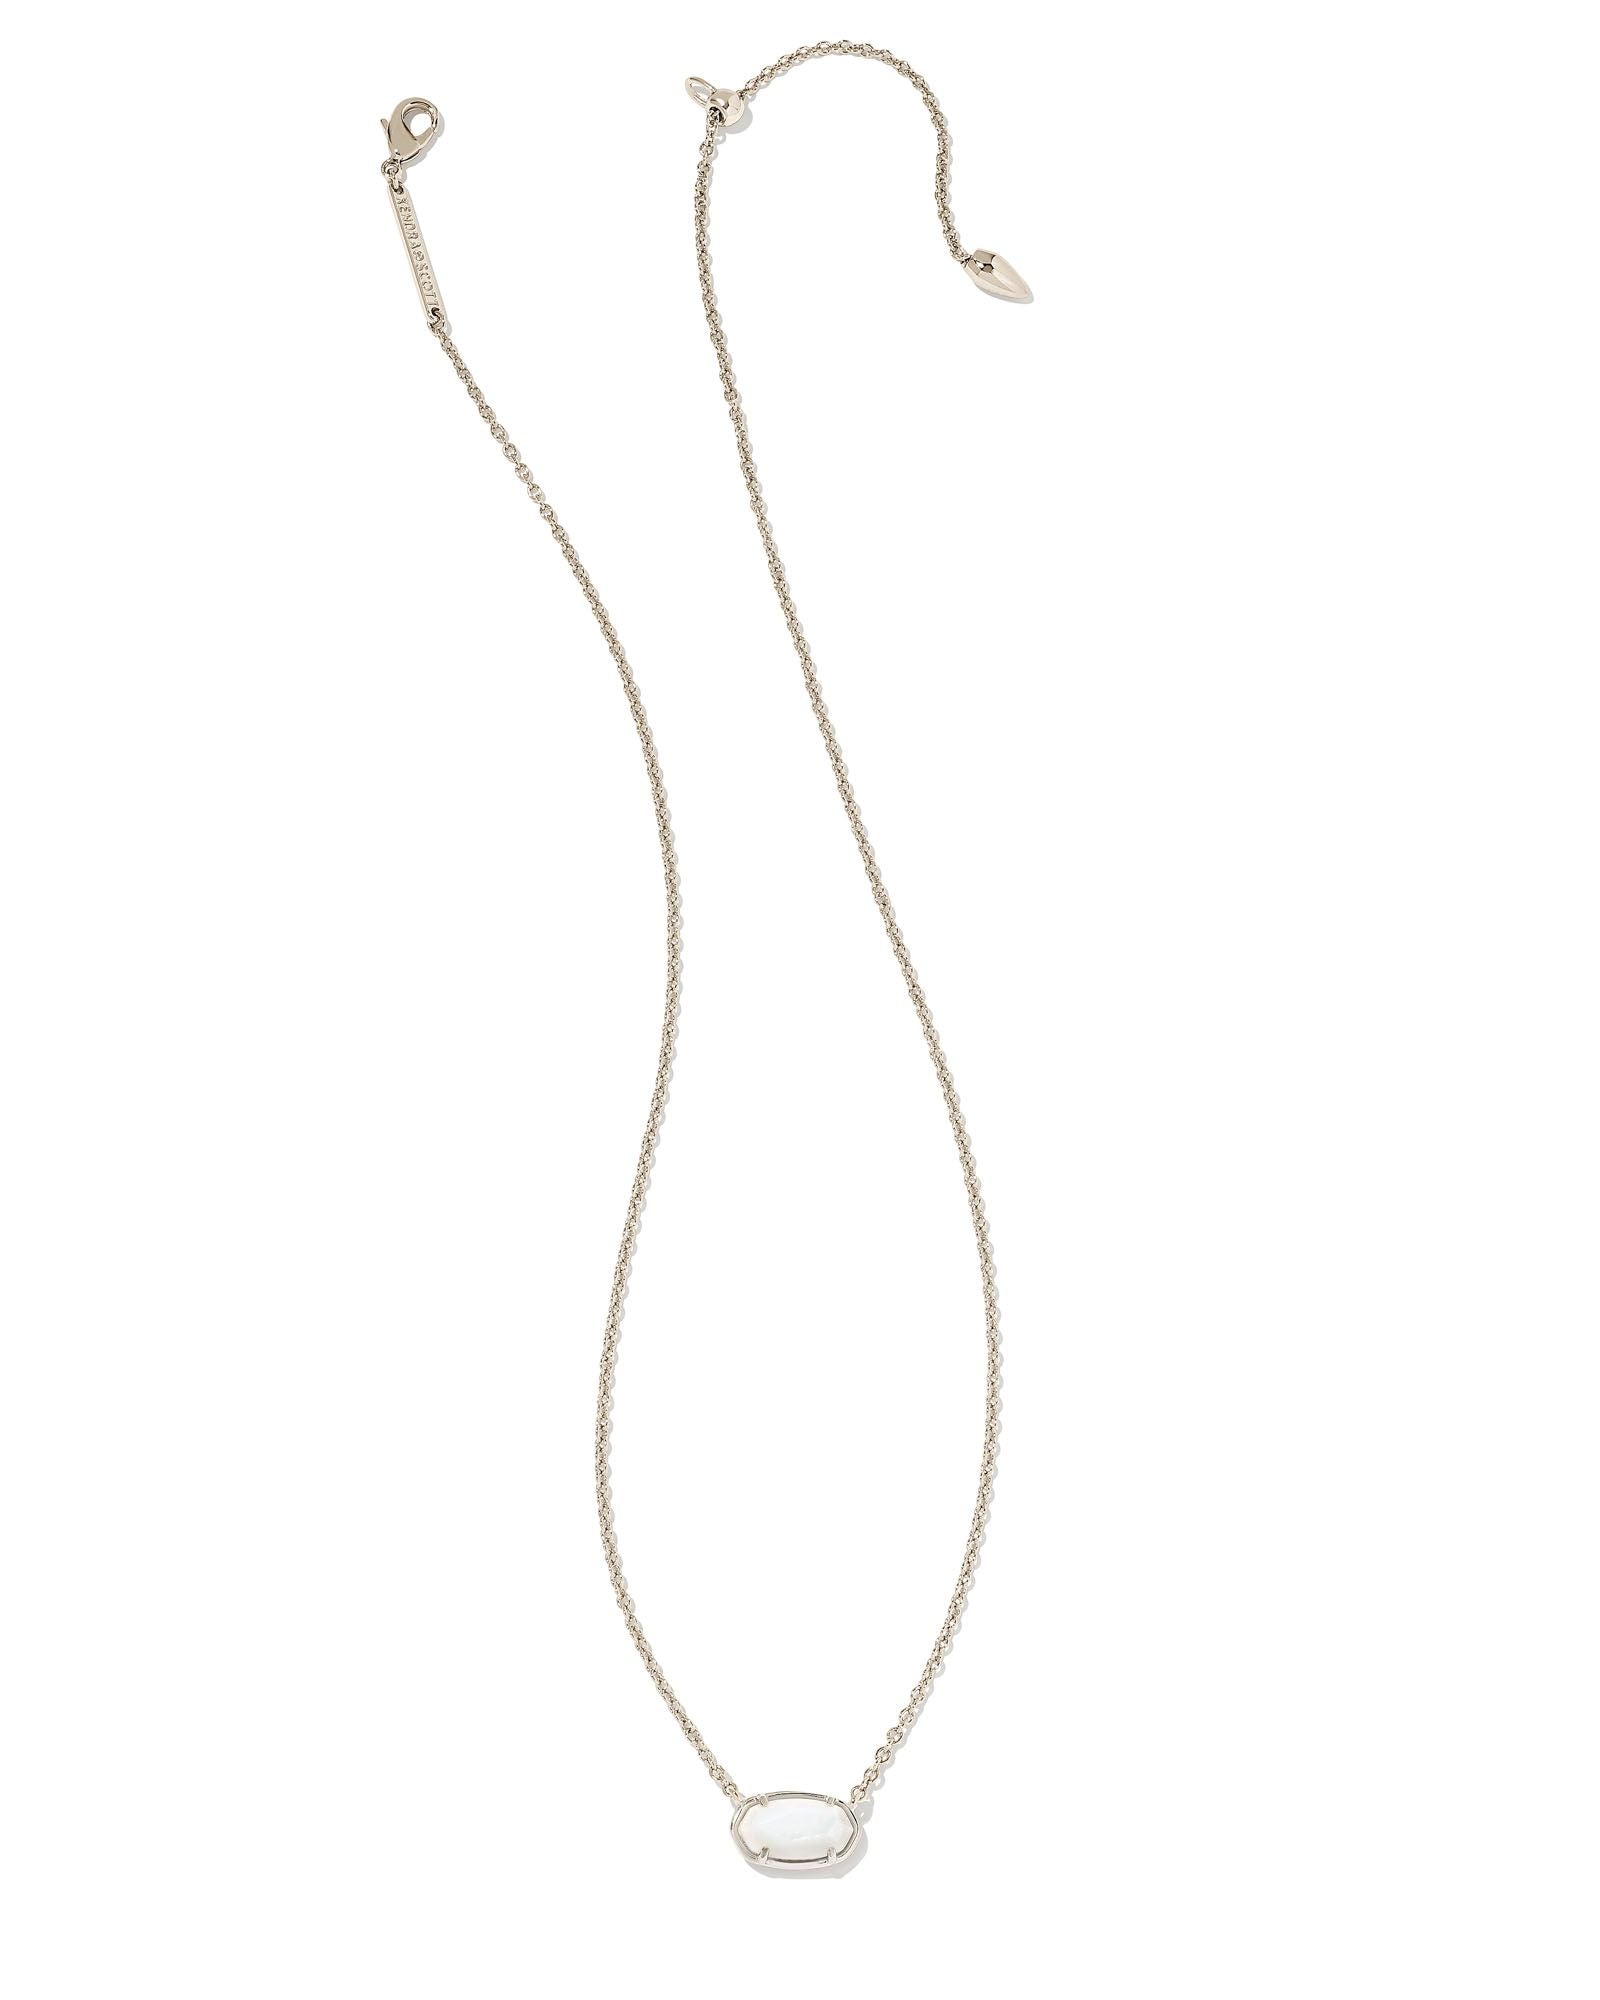 Grayson Short Pendant Necklace White MOP in Gold or Silver